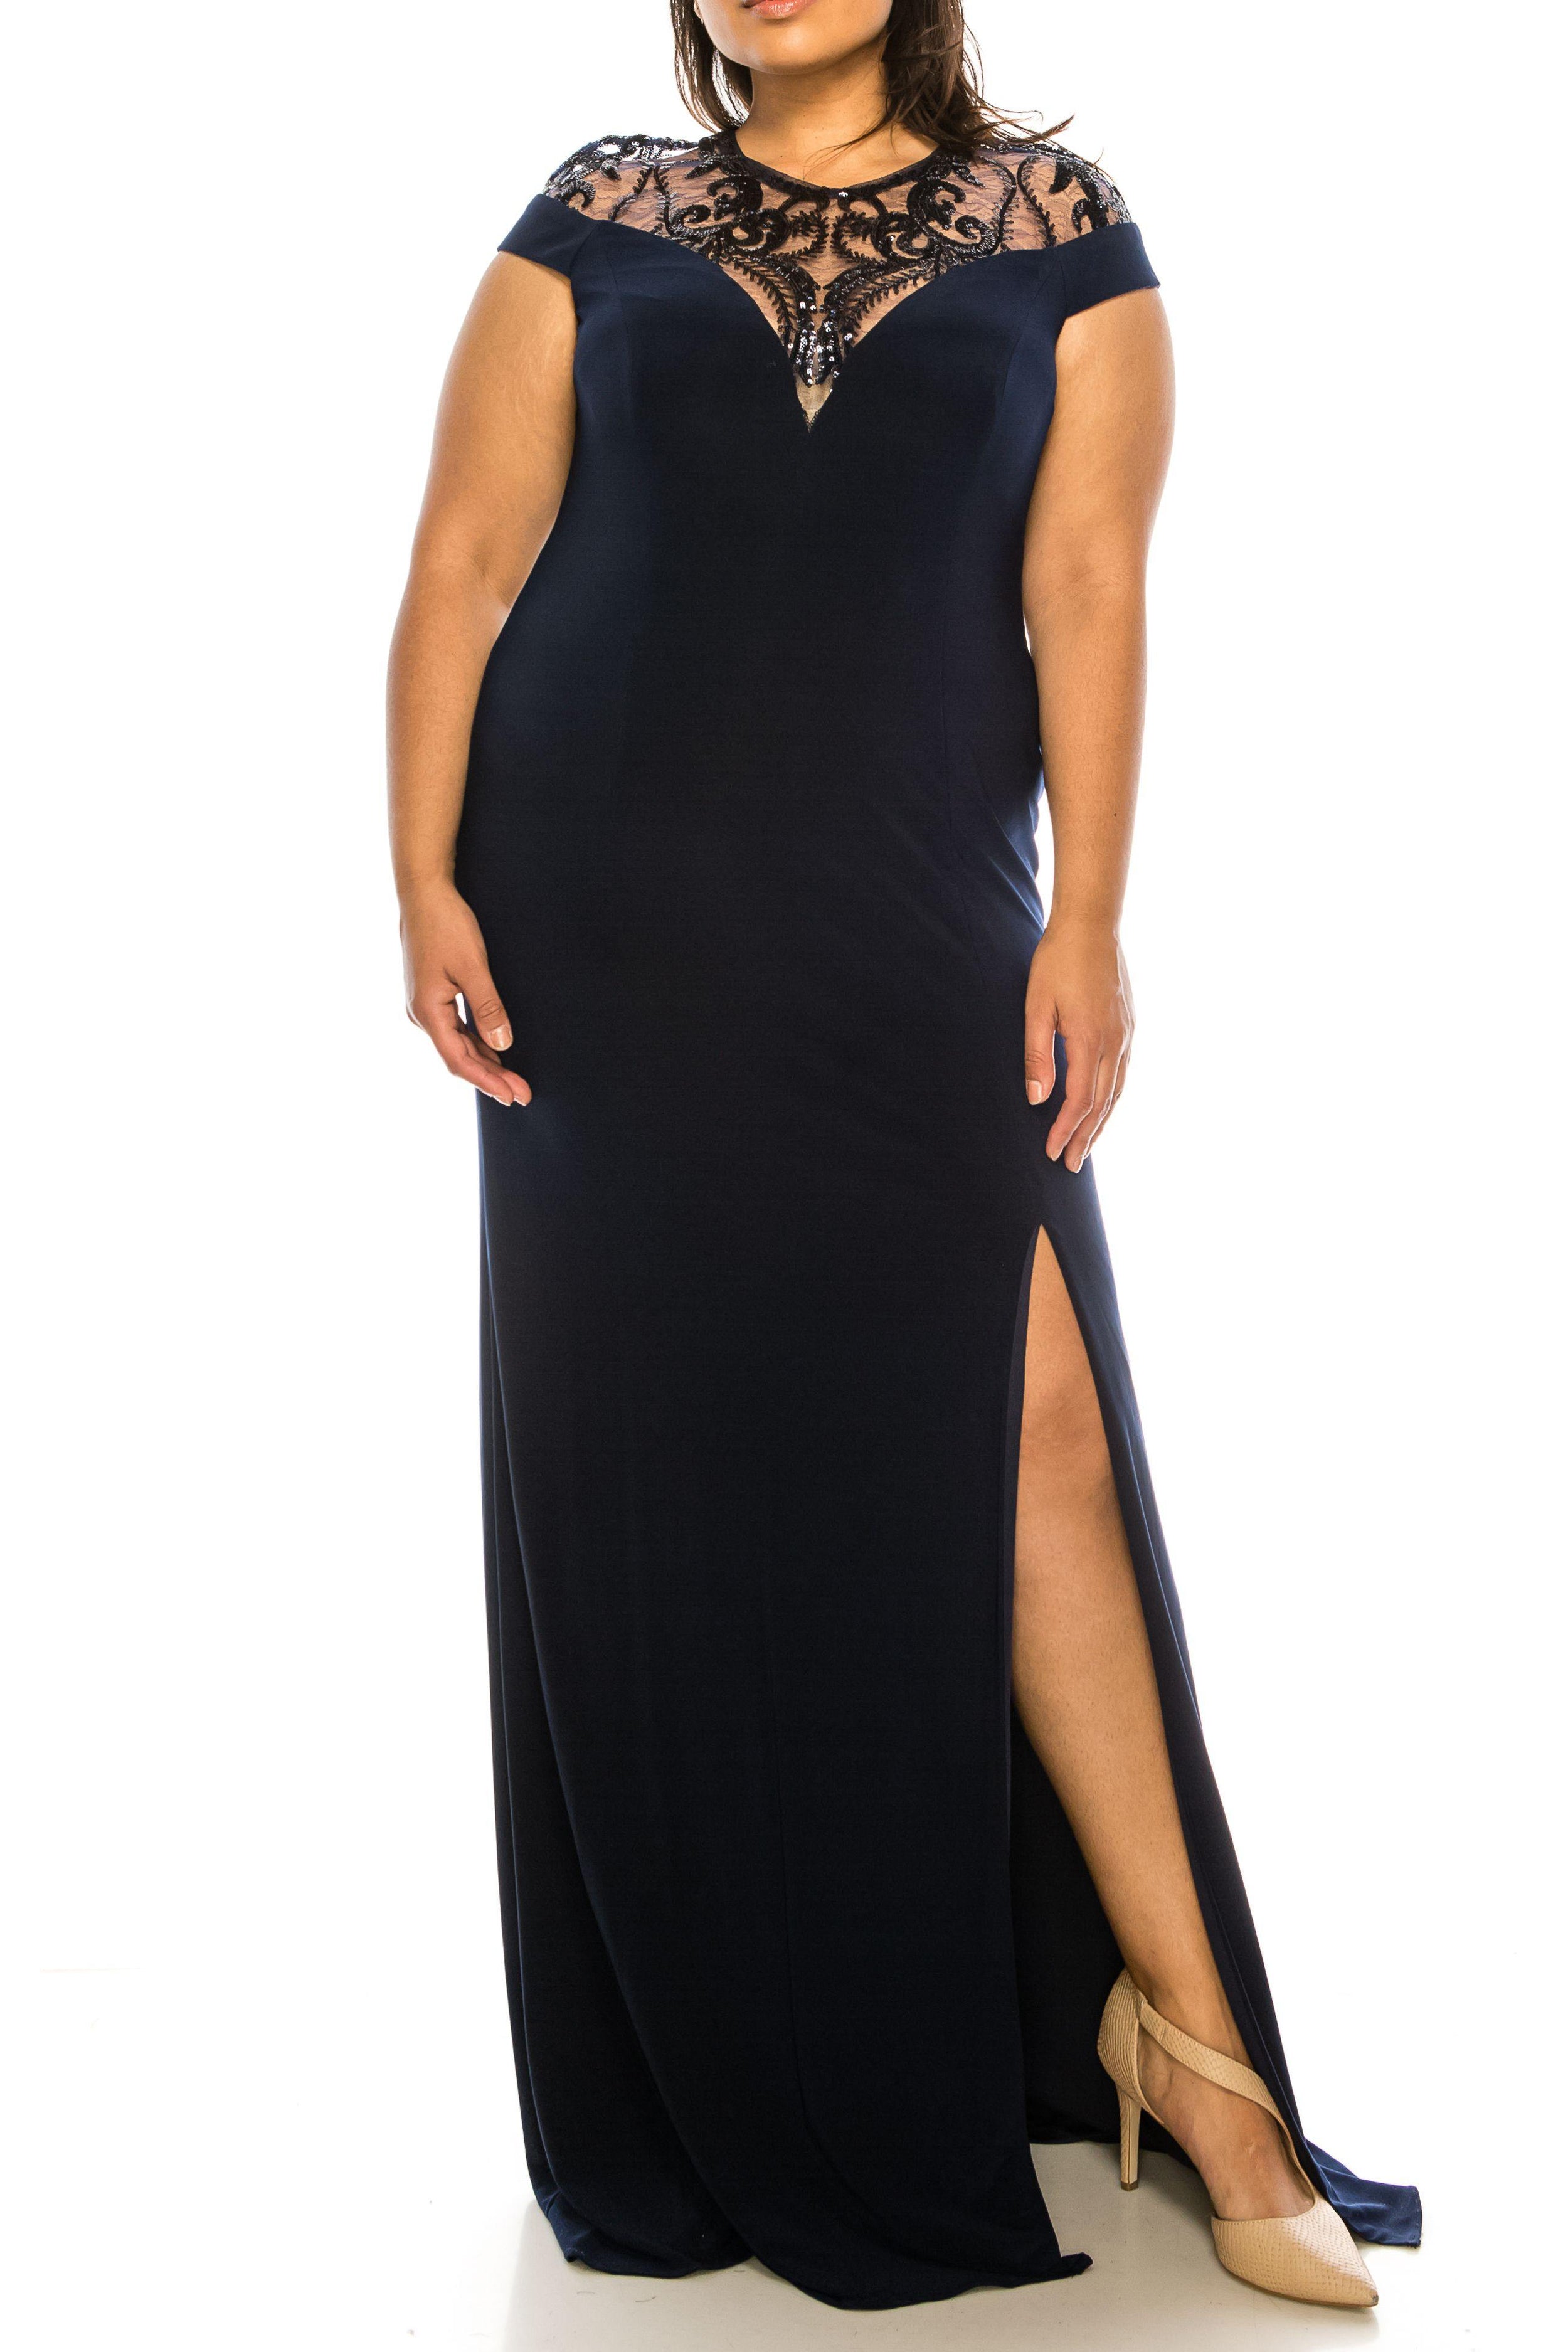 Adrianna Papell Long Formal Evening Gown AP1E202740 - The Dress Outlet